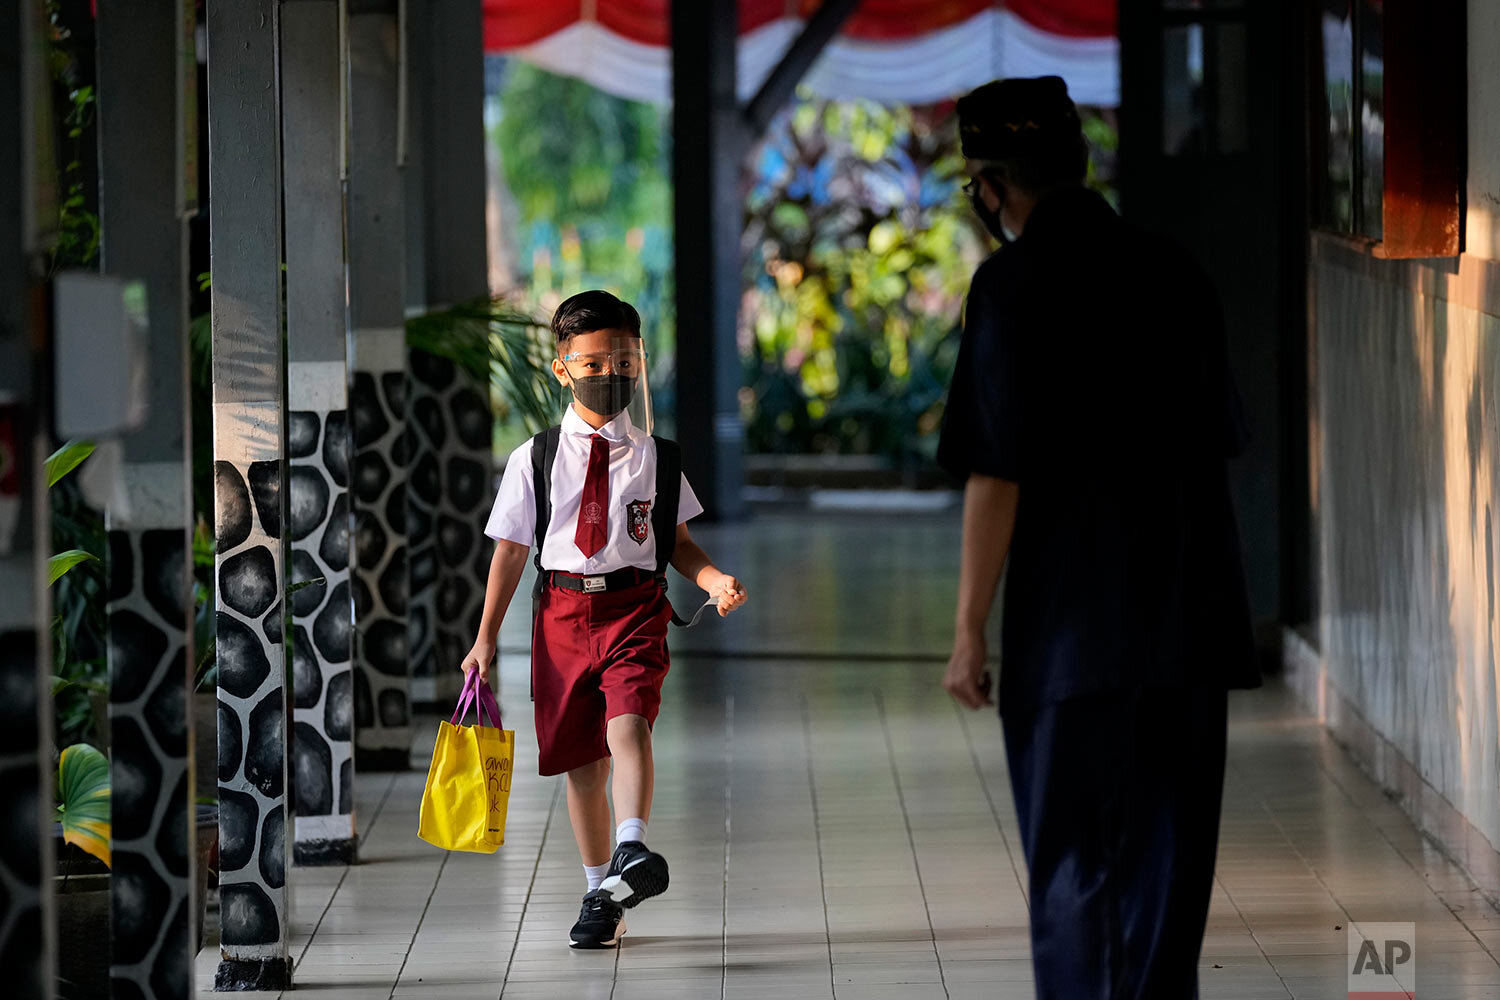  Staff greets a student during the first day of school reopening at an elementary school in Jakarta, Indonesia, Monday, Aug. 30, 2021.  (AP Photo/Dita Alangkara) 